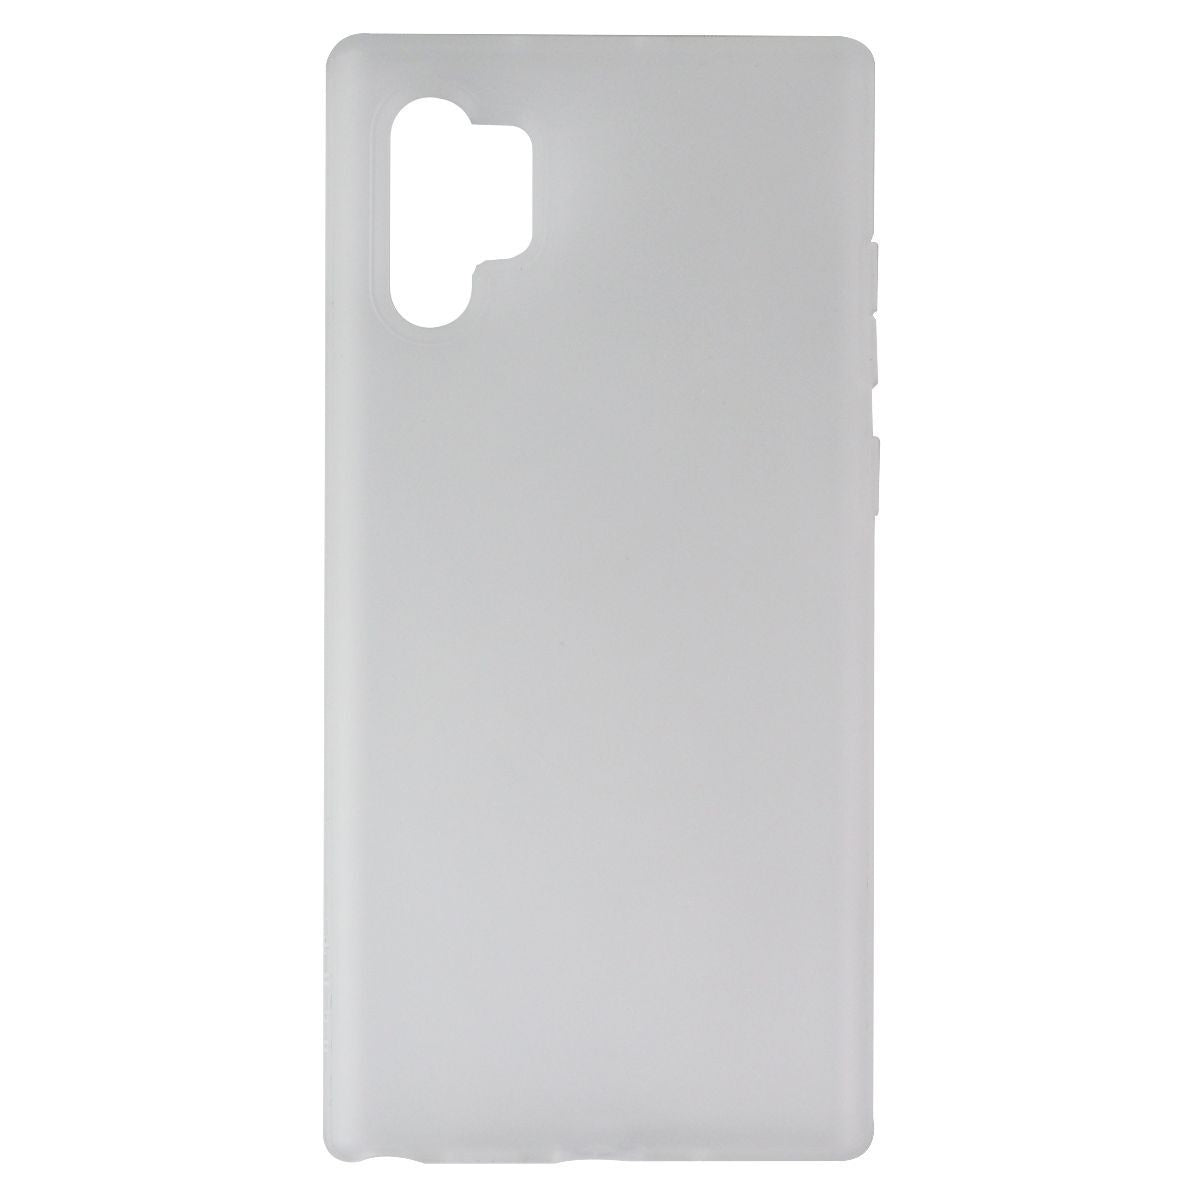 Incipio Tran5form Series Case for Galaxy Note10+ / Note10+ (5G) - Clear / Frost Cell Phone - Cases, Covers & Skins Incipio    - Simple Cell Bulk Wholesale Pricing - USA Seller